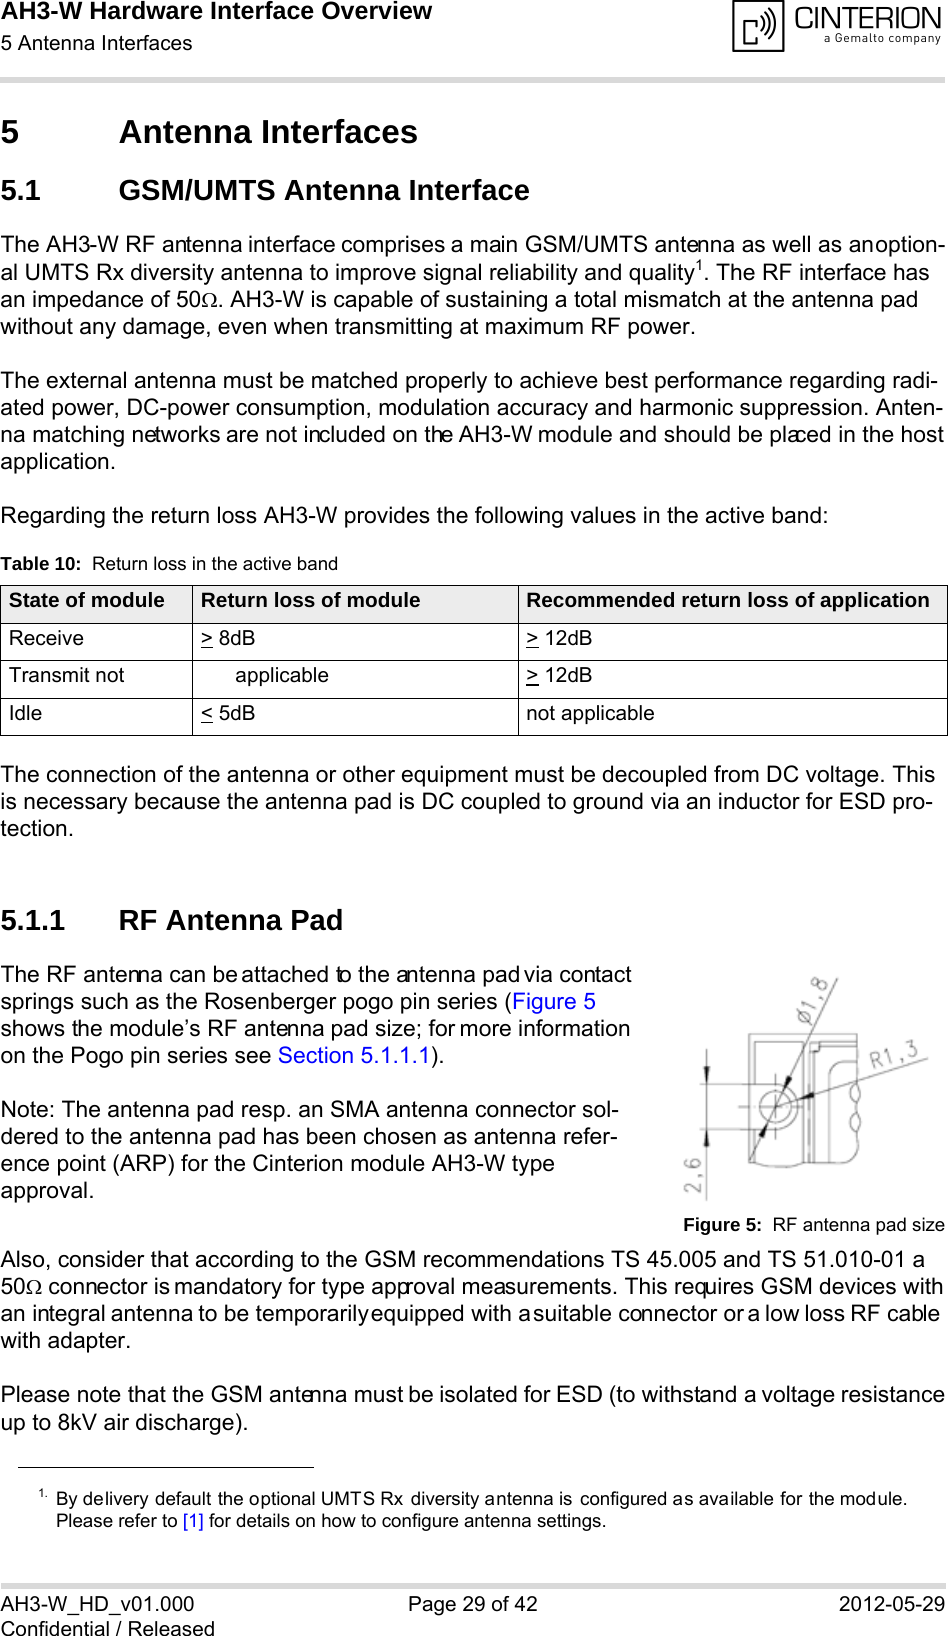 AH3-W Hardware Interface Overview5 Antenna Interfaces32AH3-W_HD_v01.000 Page 29 of 42 2012-05-29Confidential / Released5 Antenna Interfaces5.1 GSM/UMTS Antenna InterfaceThe AH3-W RF antenna interface comprises a main GSM/UMTS antenna as well as an option-al UMTS Rx diversity antenna to improve signal reliability and quality1. The RF interface has an impedance of 50. AH3-W is capable of sustaining a total mismatch at the antenna pad without any damage, even when transmitting at maximum RF power.The external antenna must be matched properly to achieve best performance regarding radi-ated power, DC-power consumption, modulation accuracy and harmonic suppression. Anten-na matching networks are not included on the AH3-W module and should be placed in the host application. Regarding the return loss AH3-W provides the following values in the active band:The connection of the antenna or other equipment must be decoupled from DC voltage. This is necessary because the antenna pad is DC coupled to ground via an inductor for ESD pro-tection.5.1.1 RF Antenna PadThe RF antenna can be attached to the antenna pad via contact springs such as the Rosenberger pogo pin series (Figure 5 shows the module’s RF antenna pad size; for more information on the Pogo pin series see Section 5.1.1.1). Note: The antenna pad resp. an SMA antenna connector sol-dered to the antenna pad has been chosen as antenna refer-ence point (ARP) for the Cinterion module AH3-W type approval.Figure 5:  RF antenna pad sizeAlso, consider that according to the GSM recommendations TS 45.005 and TS 51.010-01 a 50 connector is mandatory for type approval measurements. This requires GSM devices with an integral antenna to be temporarily equipped with a suitable connector or a low loss RF cable with adapter.Please note that the GSM antenna must be isolated for ESD (to withstand a voltage resistanceup to 8kV air discharge).1. By delivery default the optional UMTS Rx diversity antenna is configured as available for the module.Please refer to [1] for details on how to configure antenna settings.Table 10:  Return loss in the active bandState of module Return loss of module Recommended return loss of applicationReceive &gt; 8dB &gt; 12dBTransmit not applicable  &gt; 12dBIdle &lt; 5dB not applicable